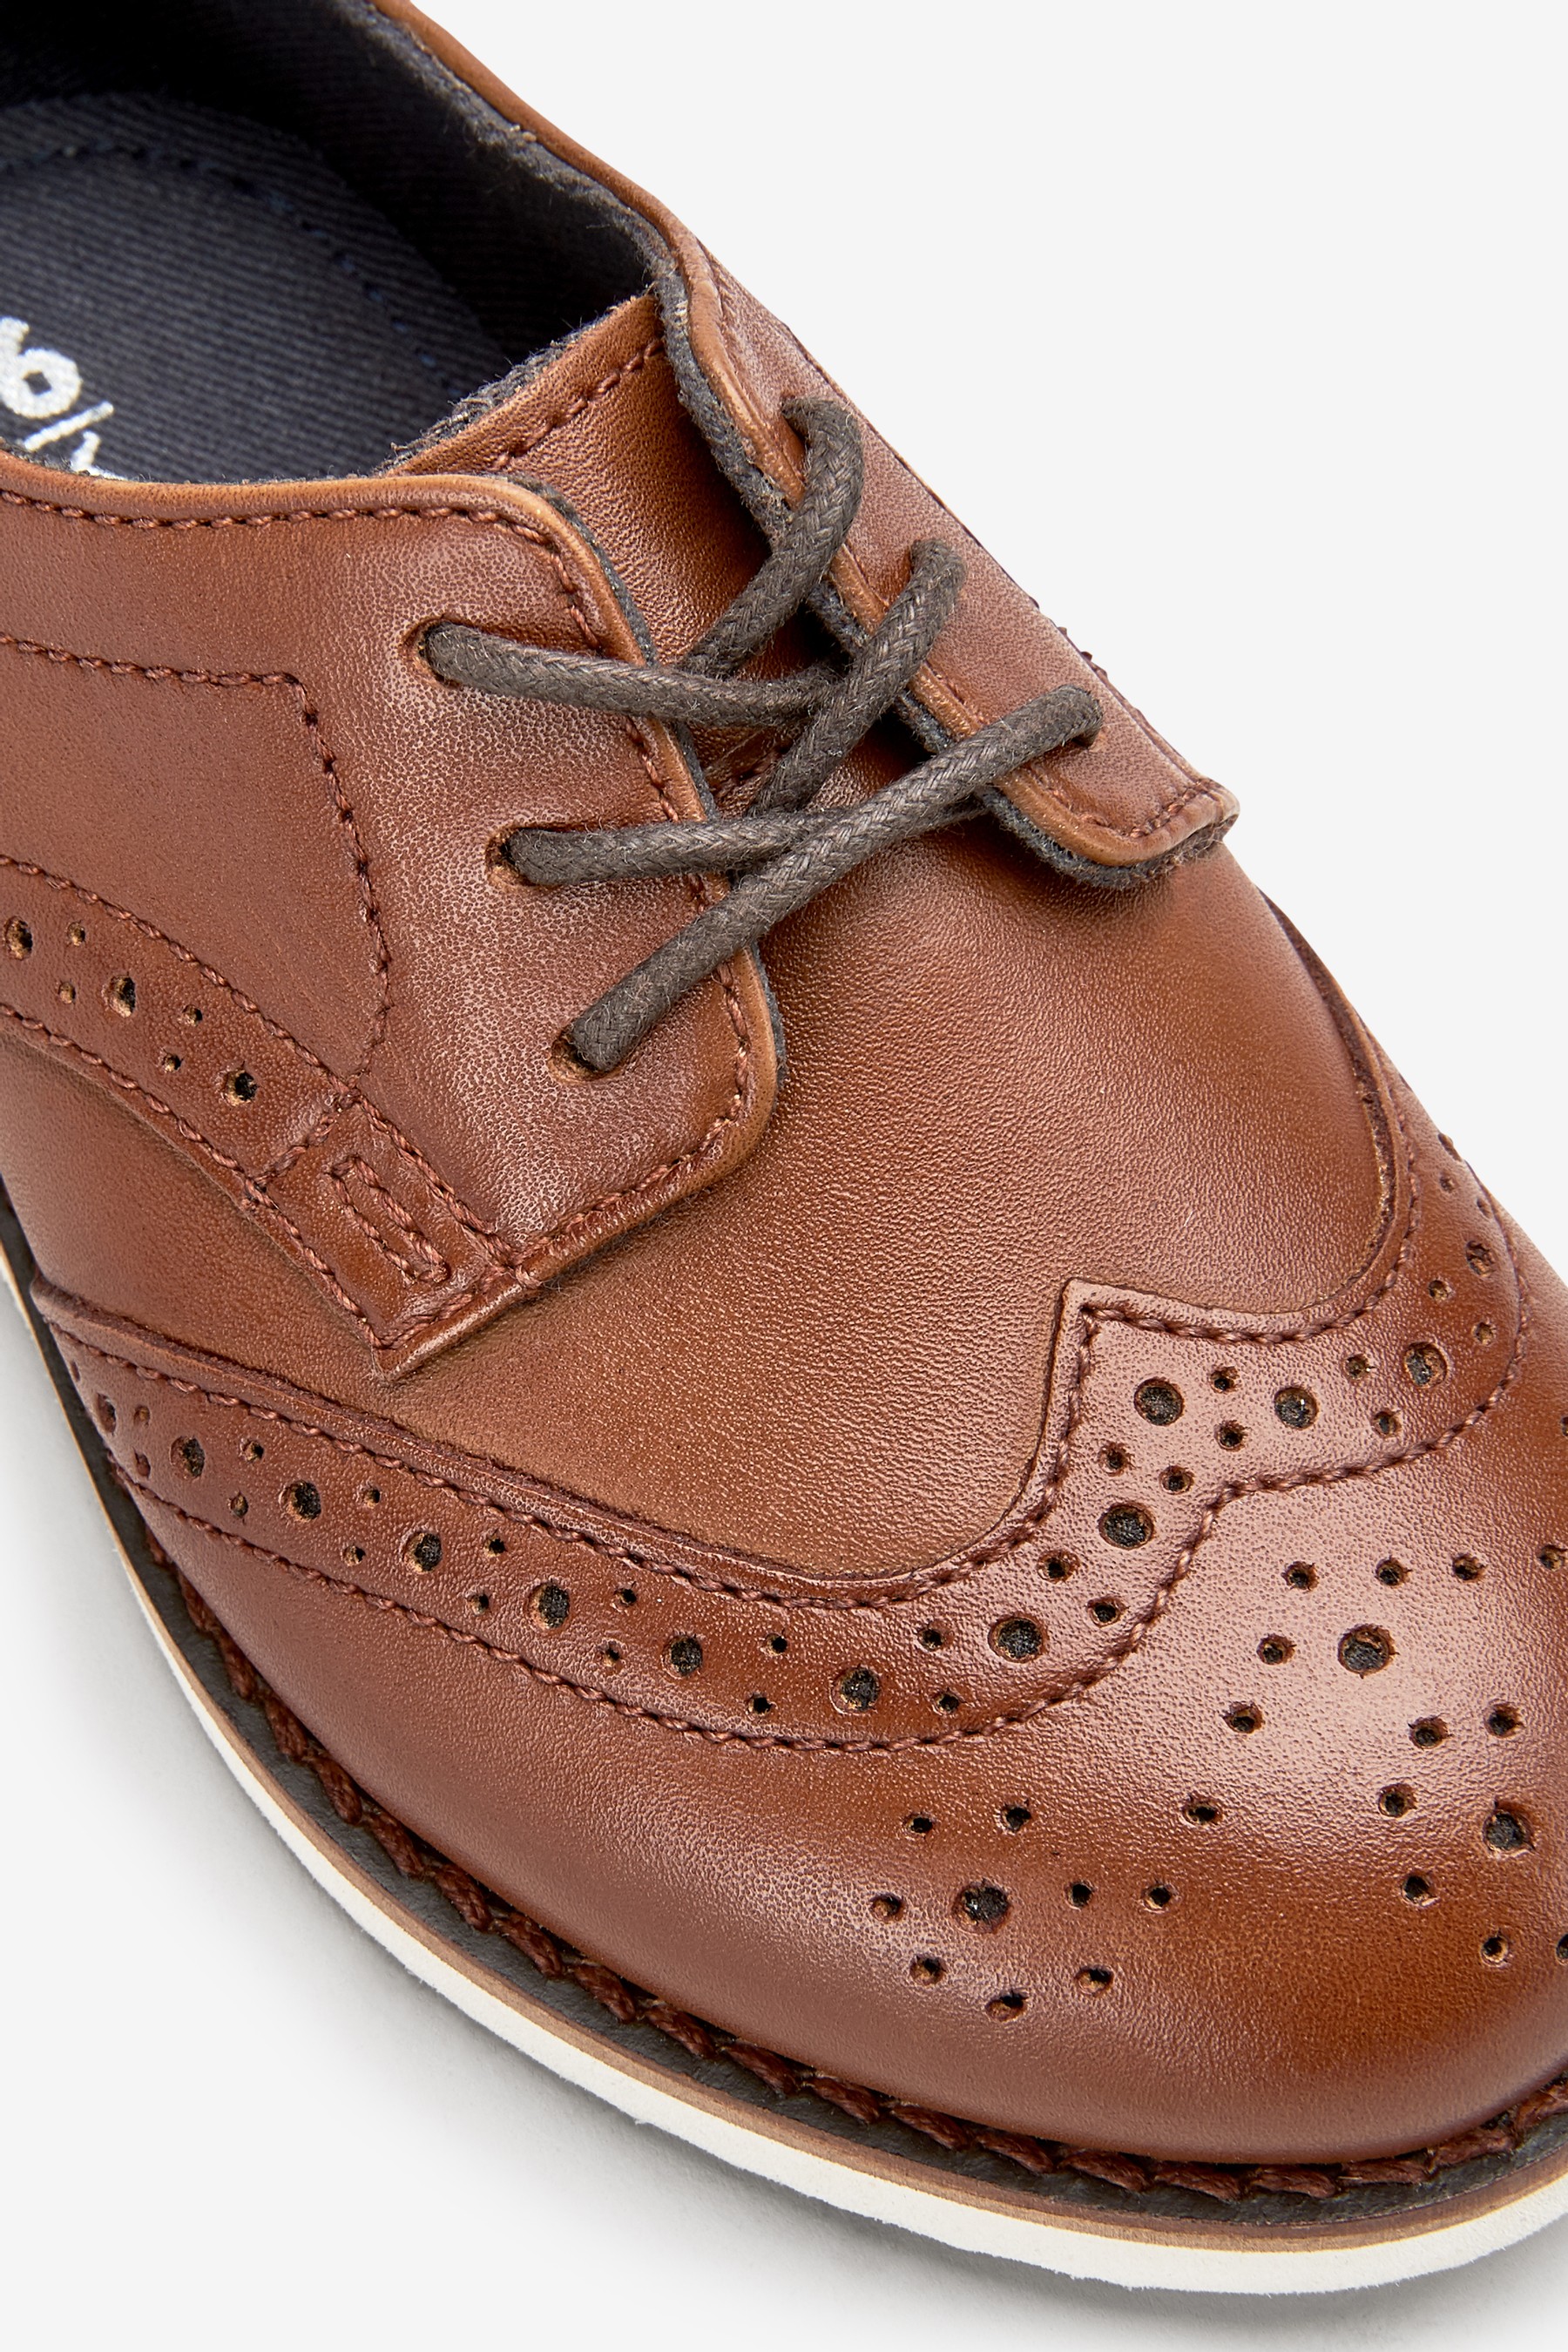 Leather Brogues Standard Fit (F)